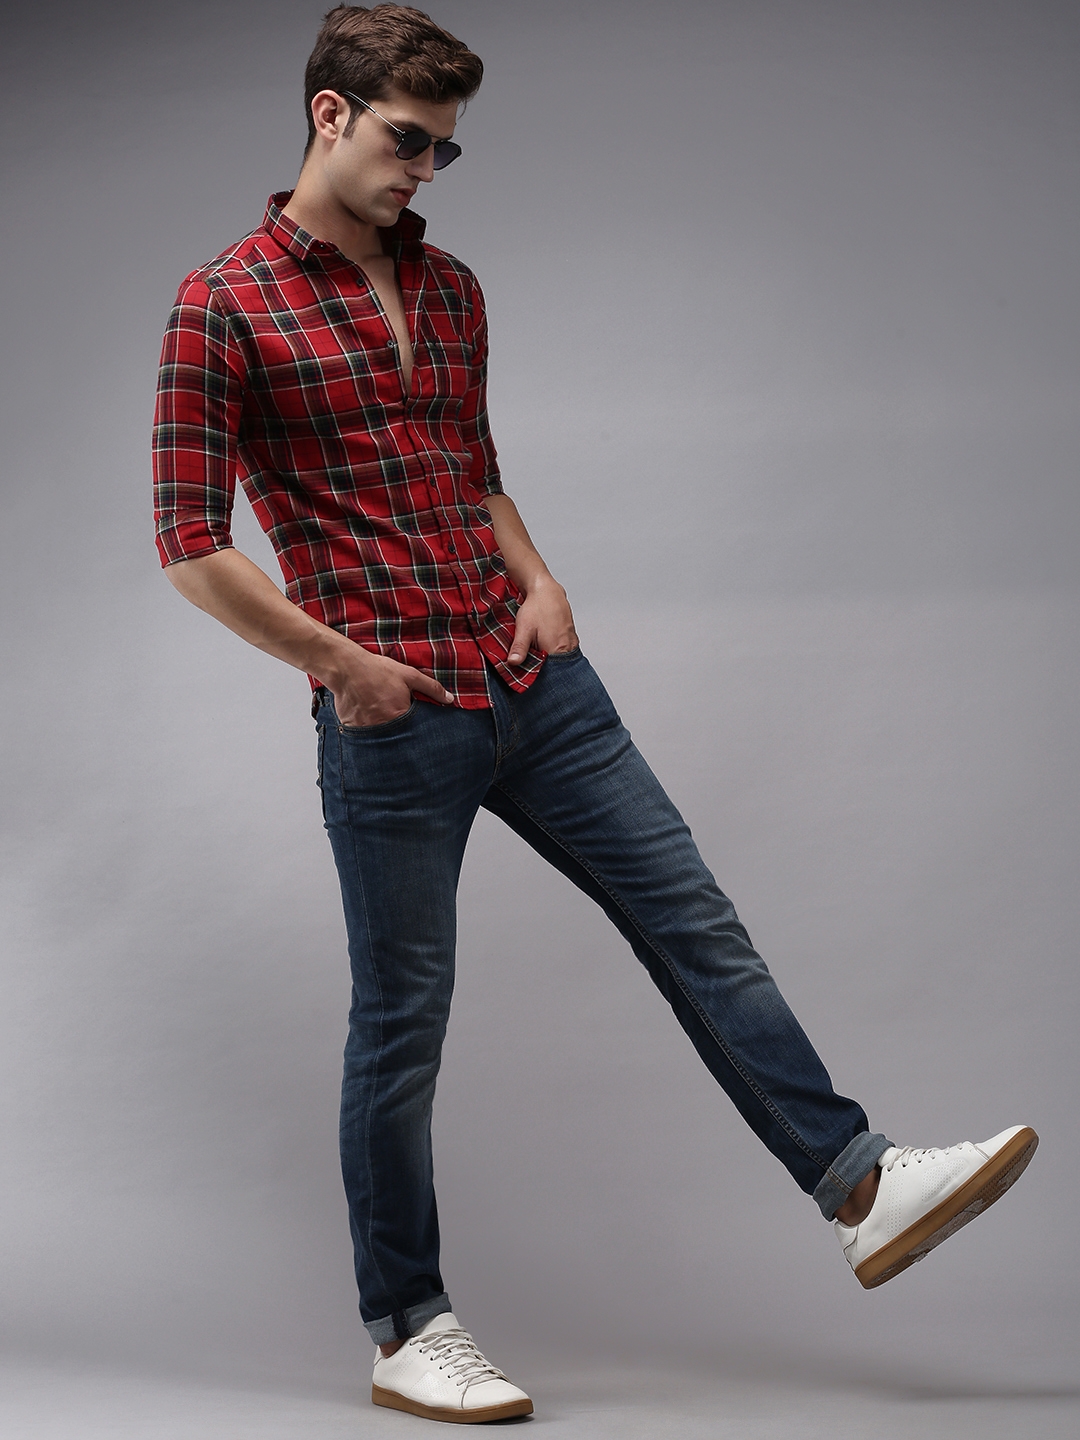 Men's Red Cotton Checked Casual Shirts